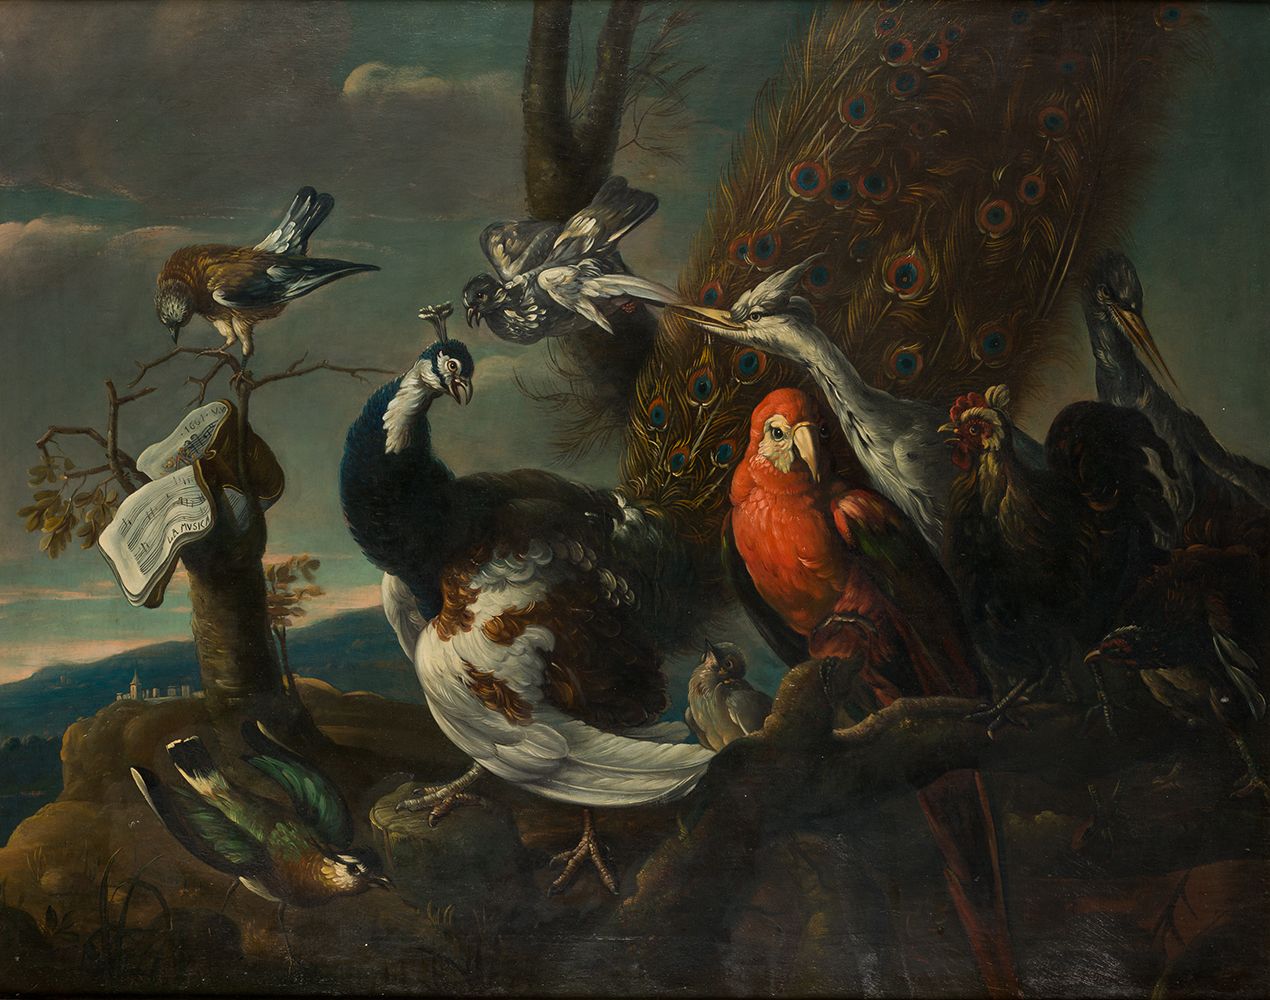 ANONYMOUS (20th century) "Concert of birds" Copy of the work by Frans Snyders in&hellip;